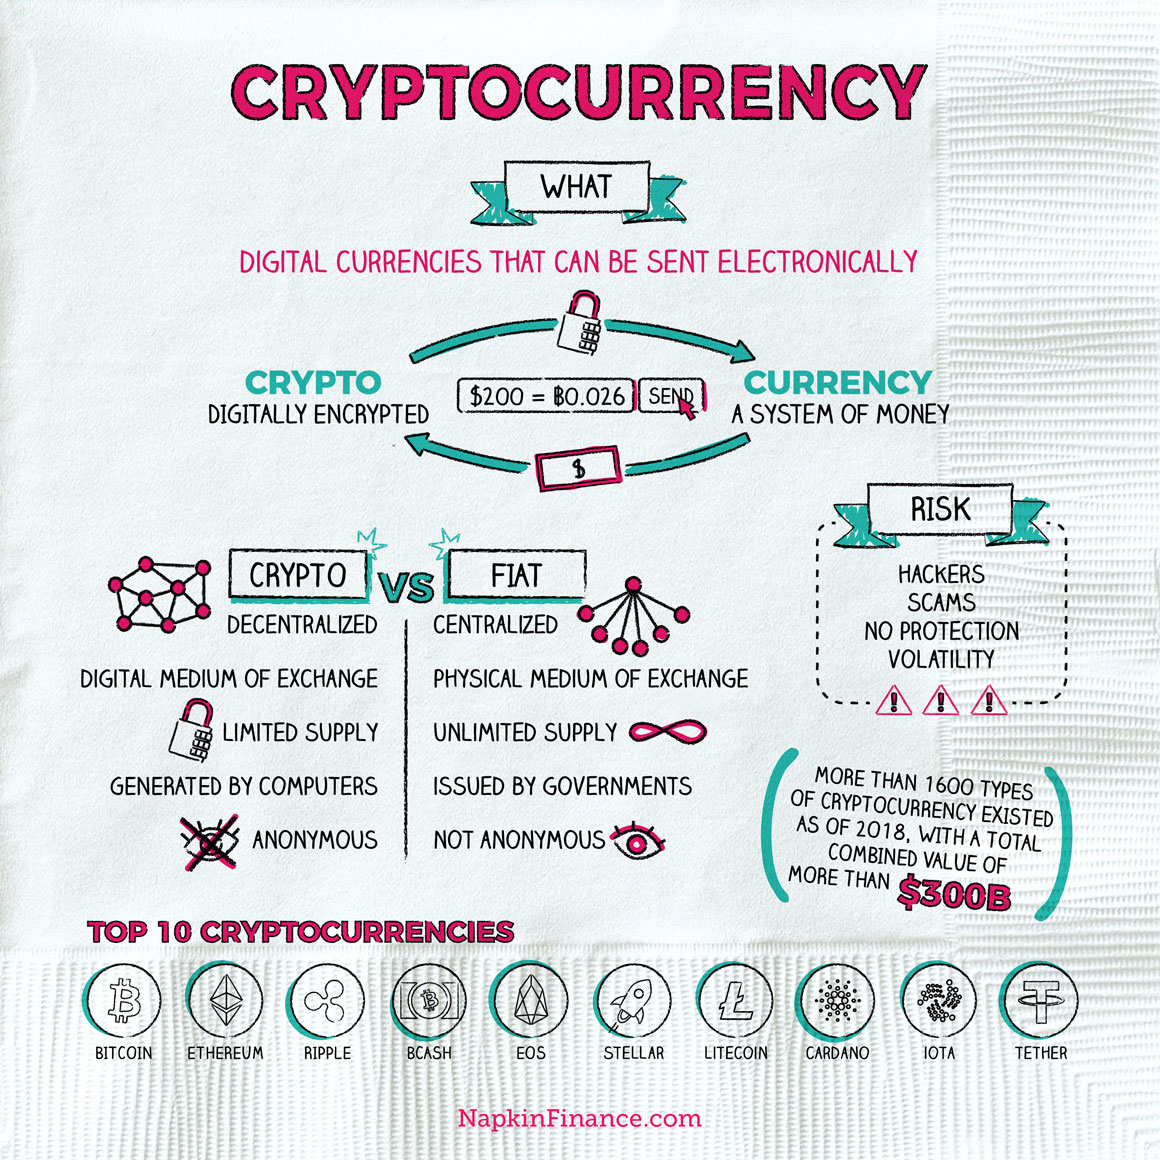 What is Cryptocurrency? Why Does Cryptocurrency Matter?